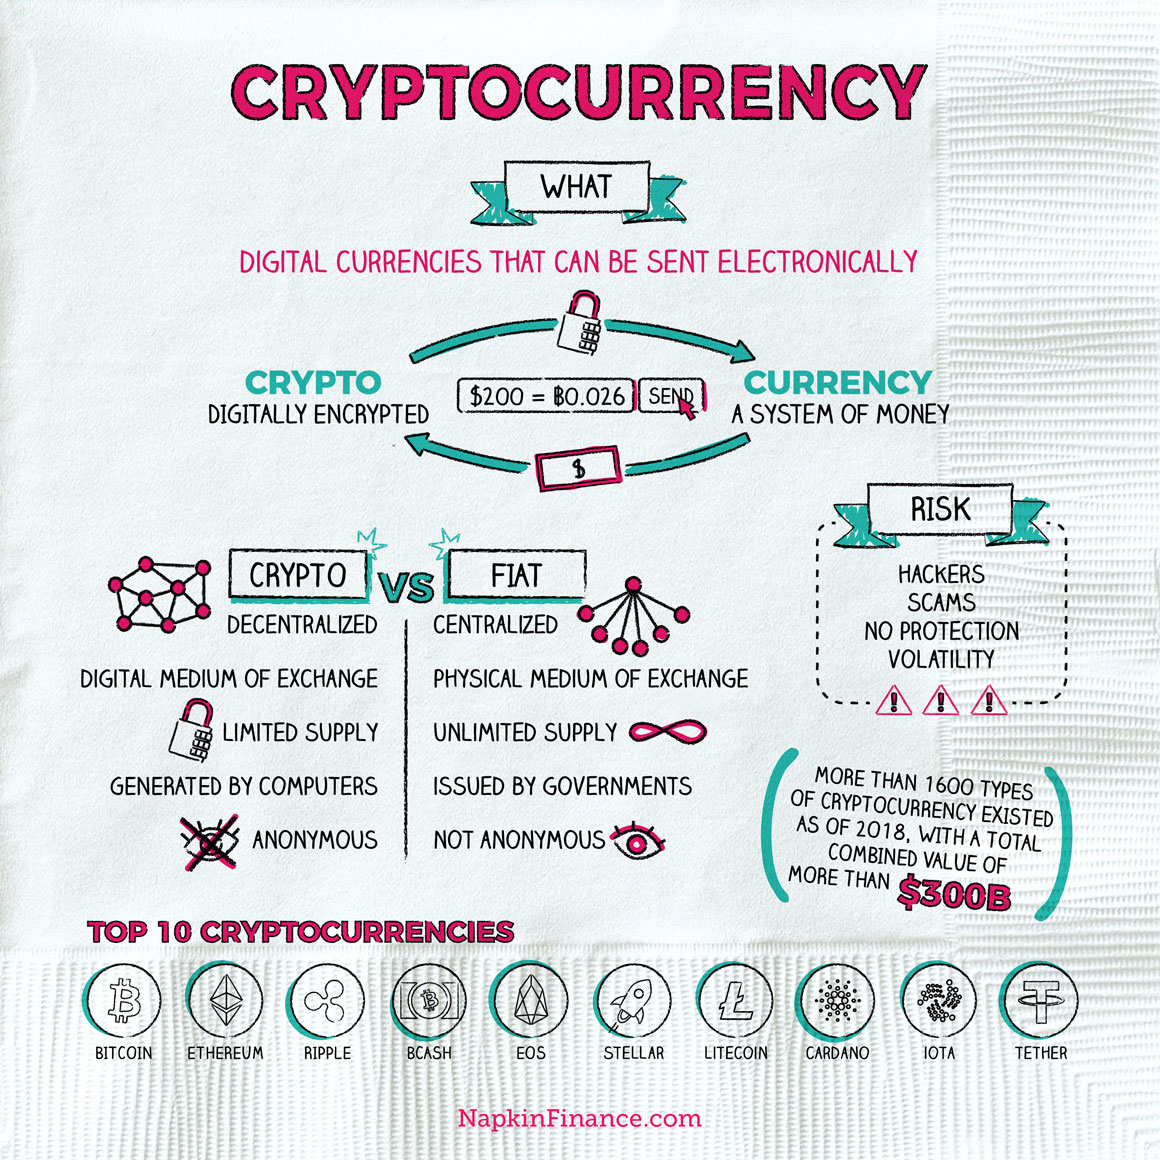 What is Cryptocurrency? Why Does Cryptocurrency Matter?